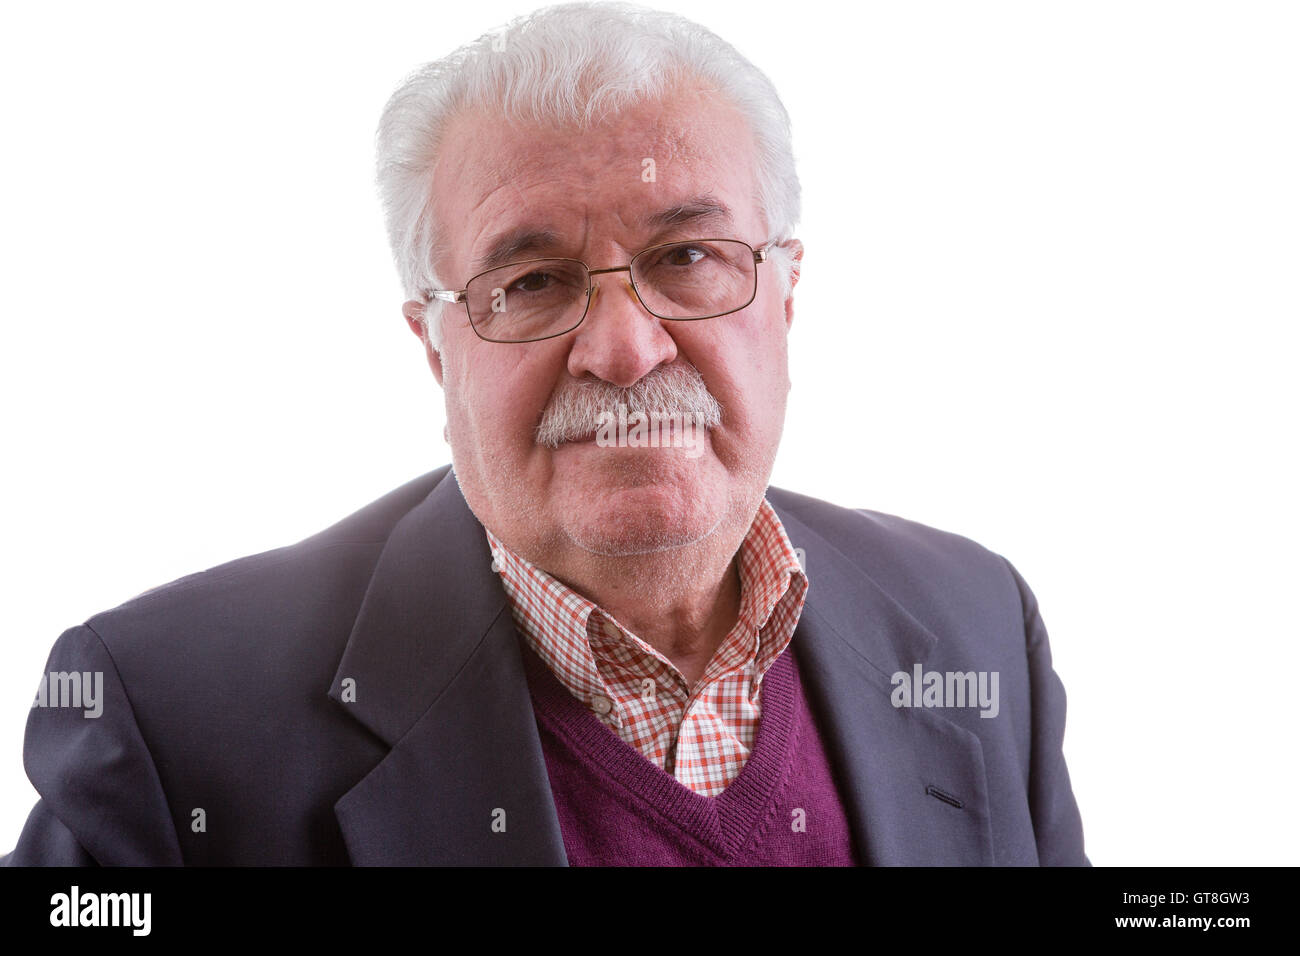 Retired senior man with a troubled contemplative expression gazing directly at the camera, head and shoulders isolated on white Stock Photo